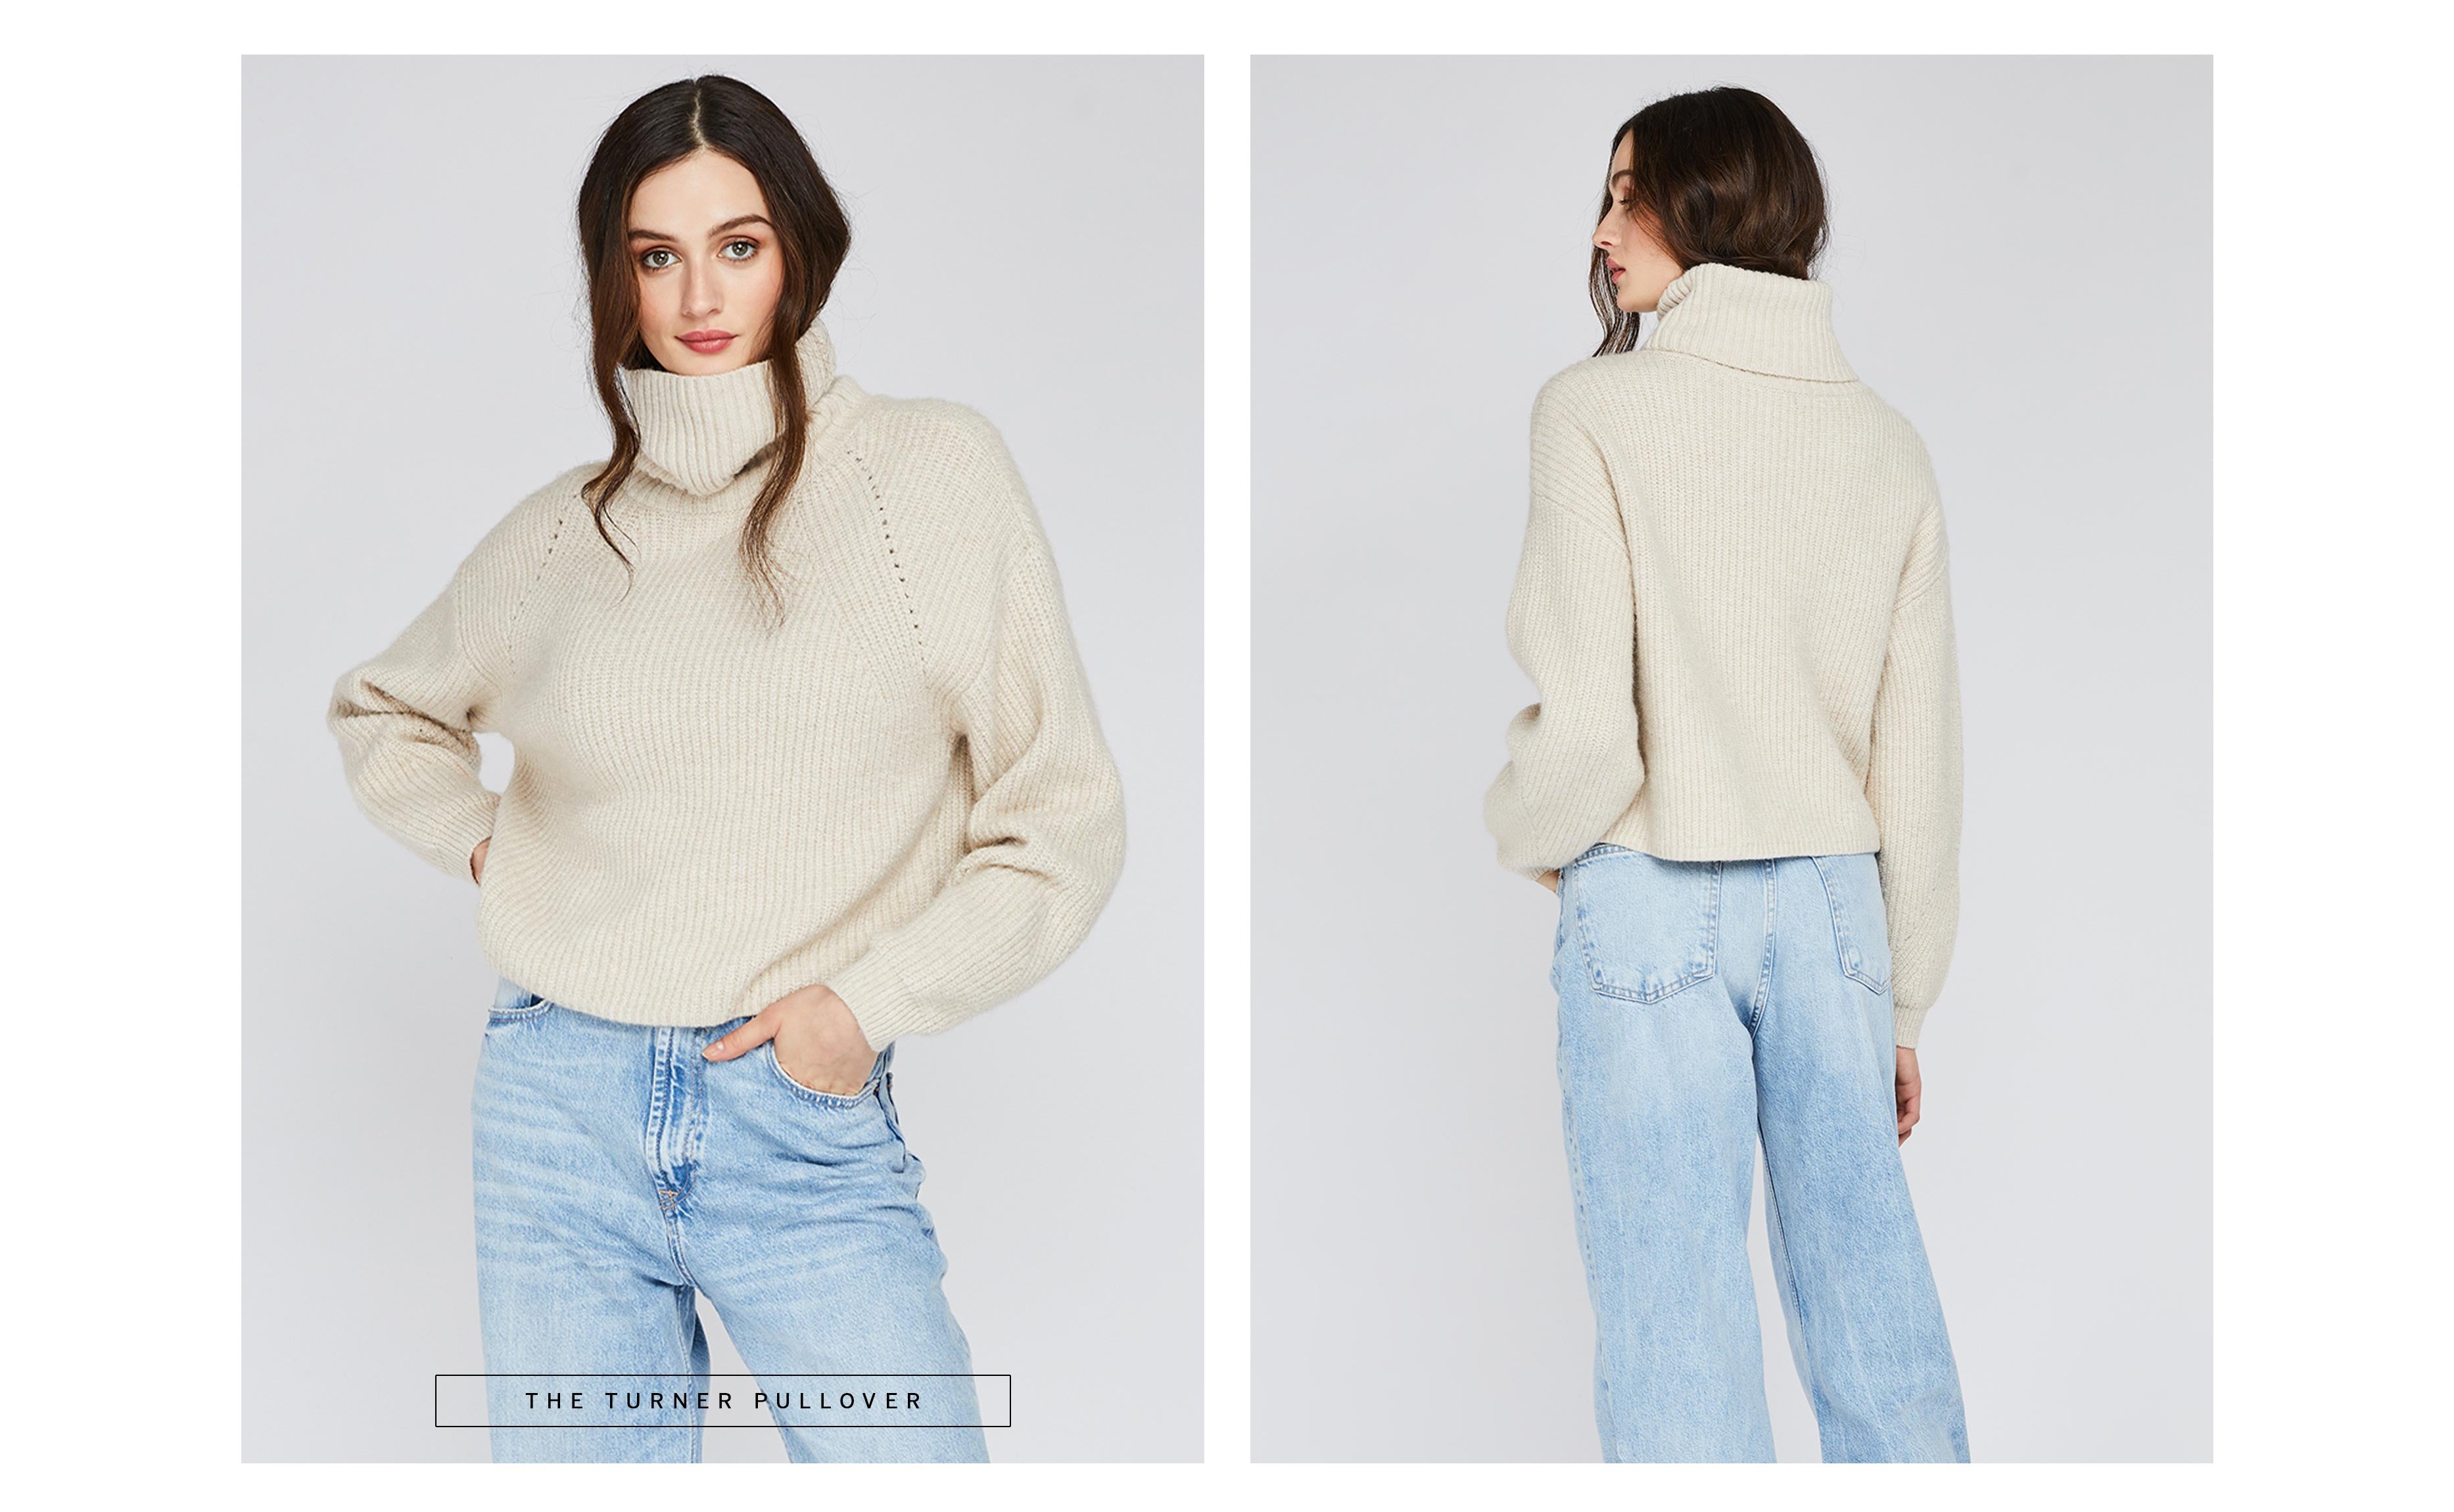 The Turner Pullover